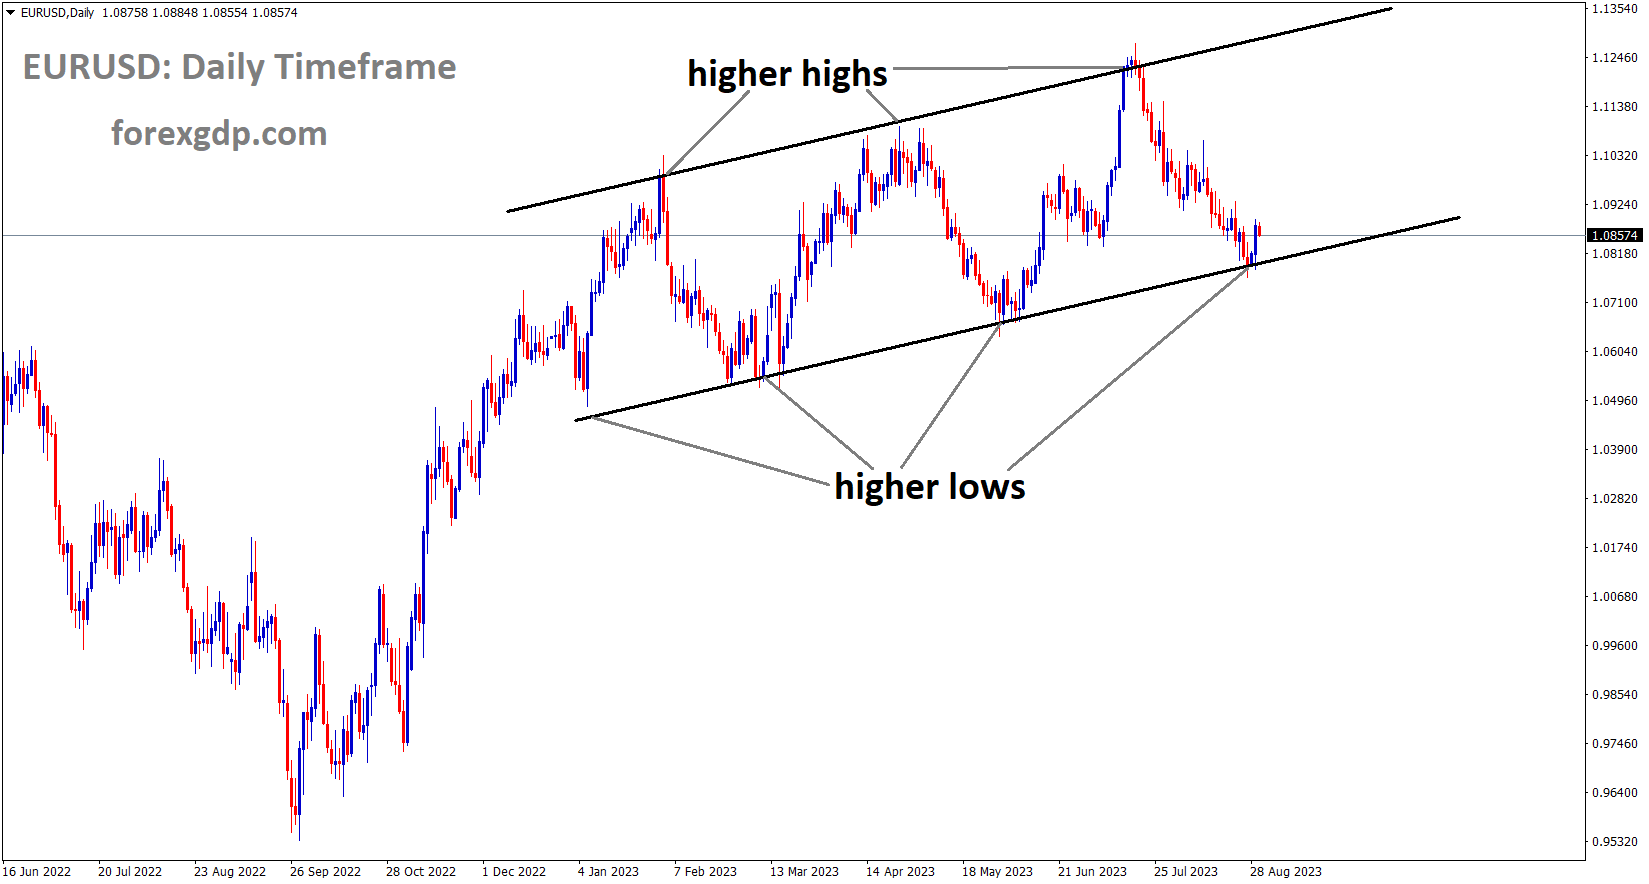 EURUSD is moving in an Ascending channel and the market has rebounded from the higher low area of the channel